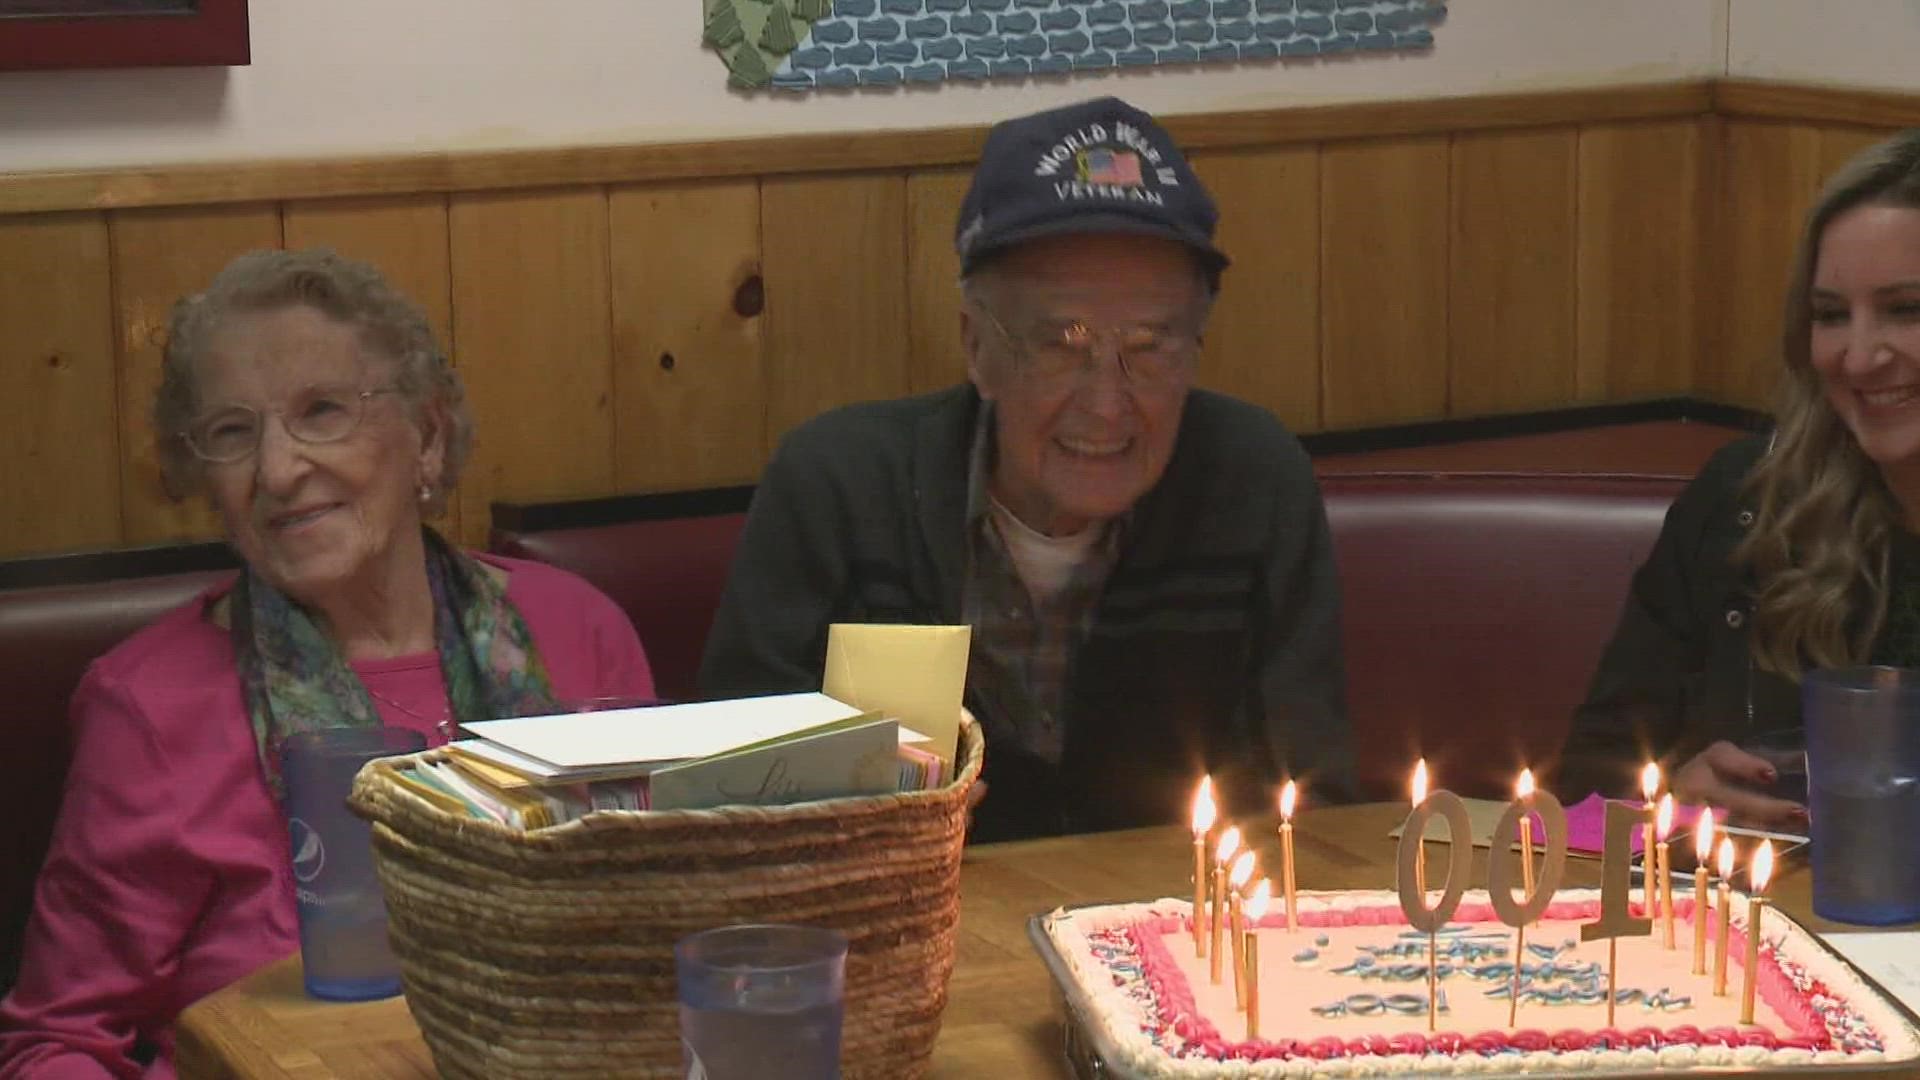 Arthur Babineau turned 100 today and he spent part of his special day having lunch with his family at Becky's